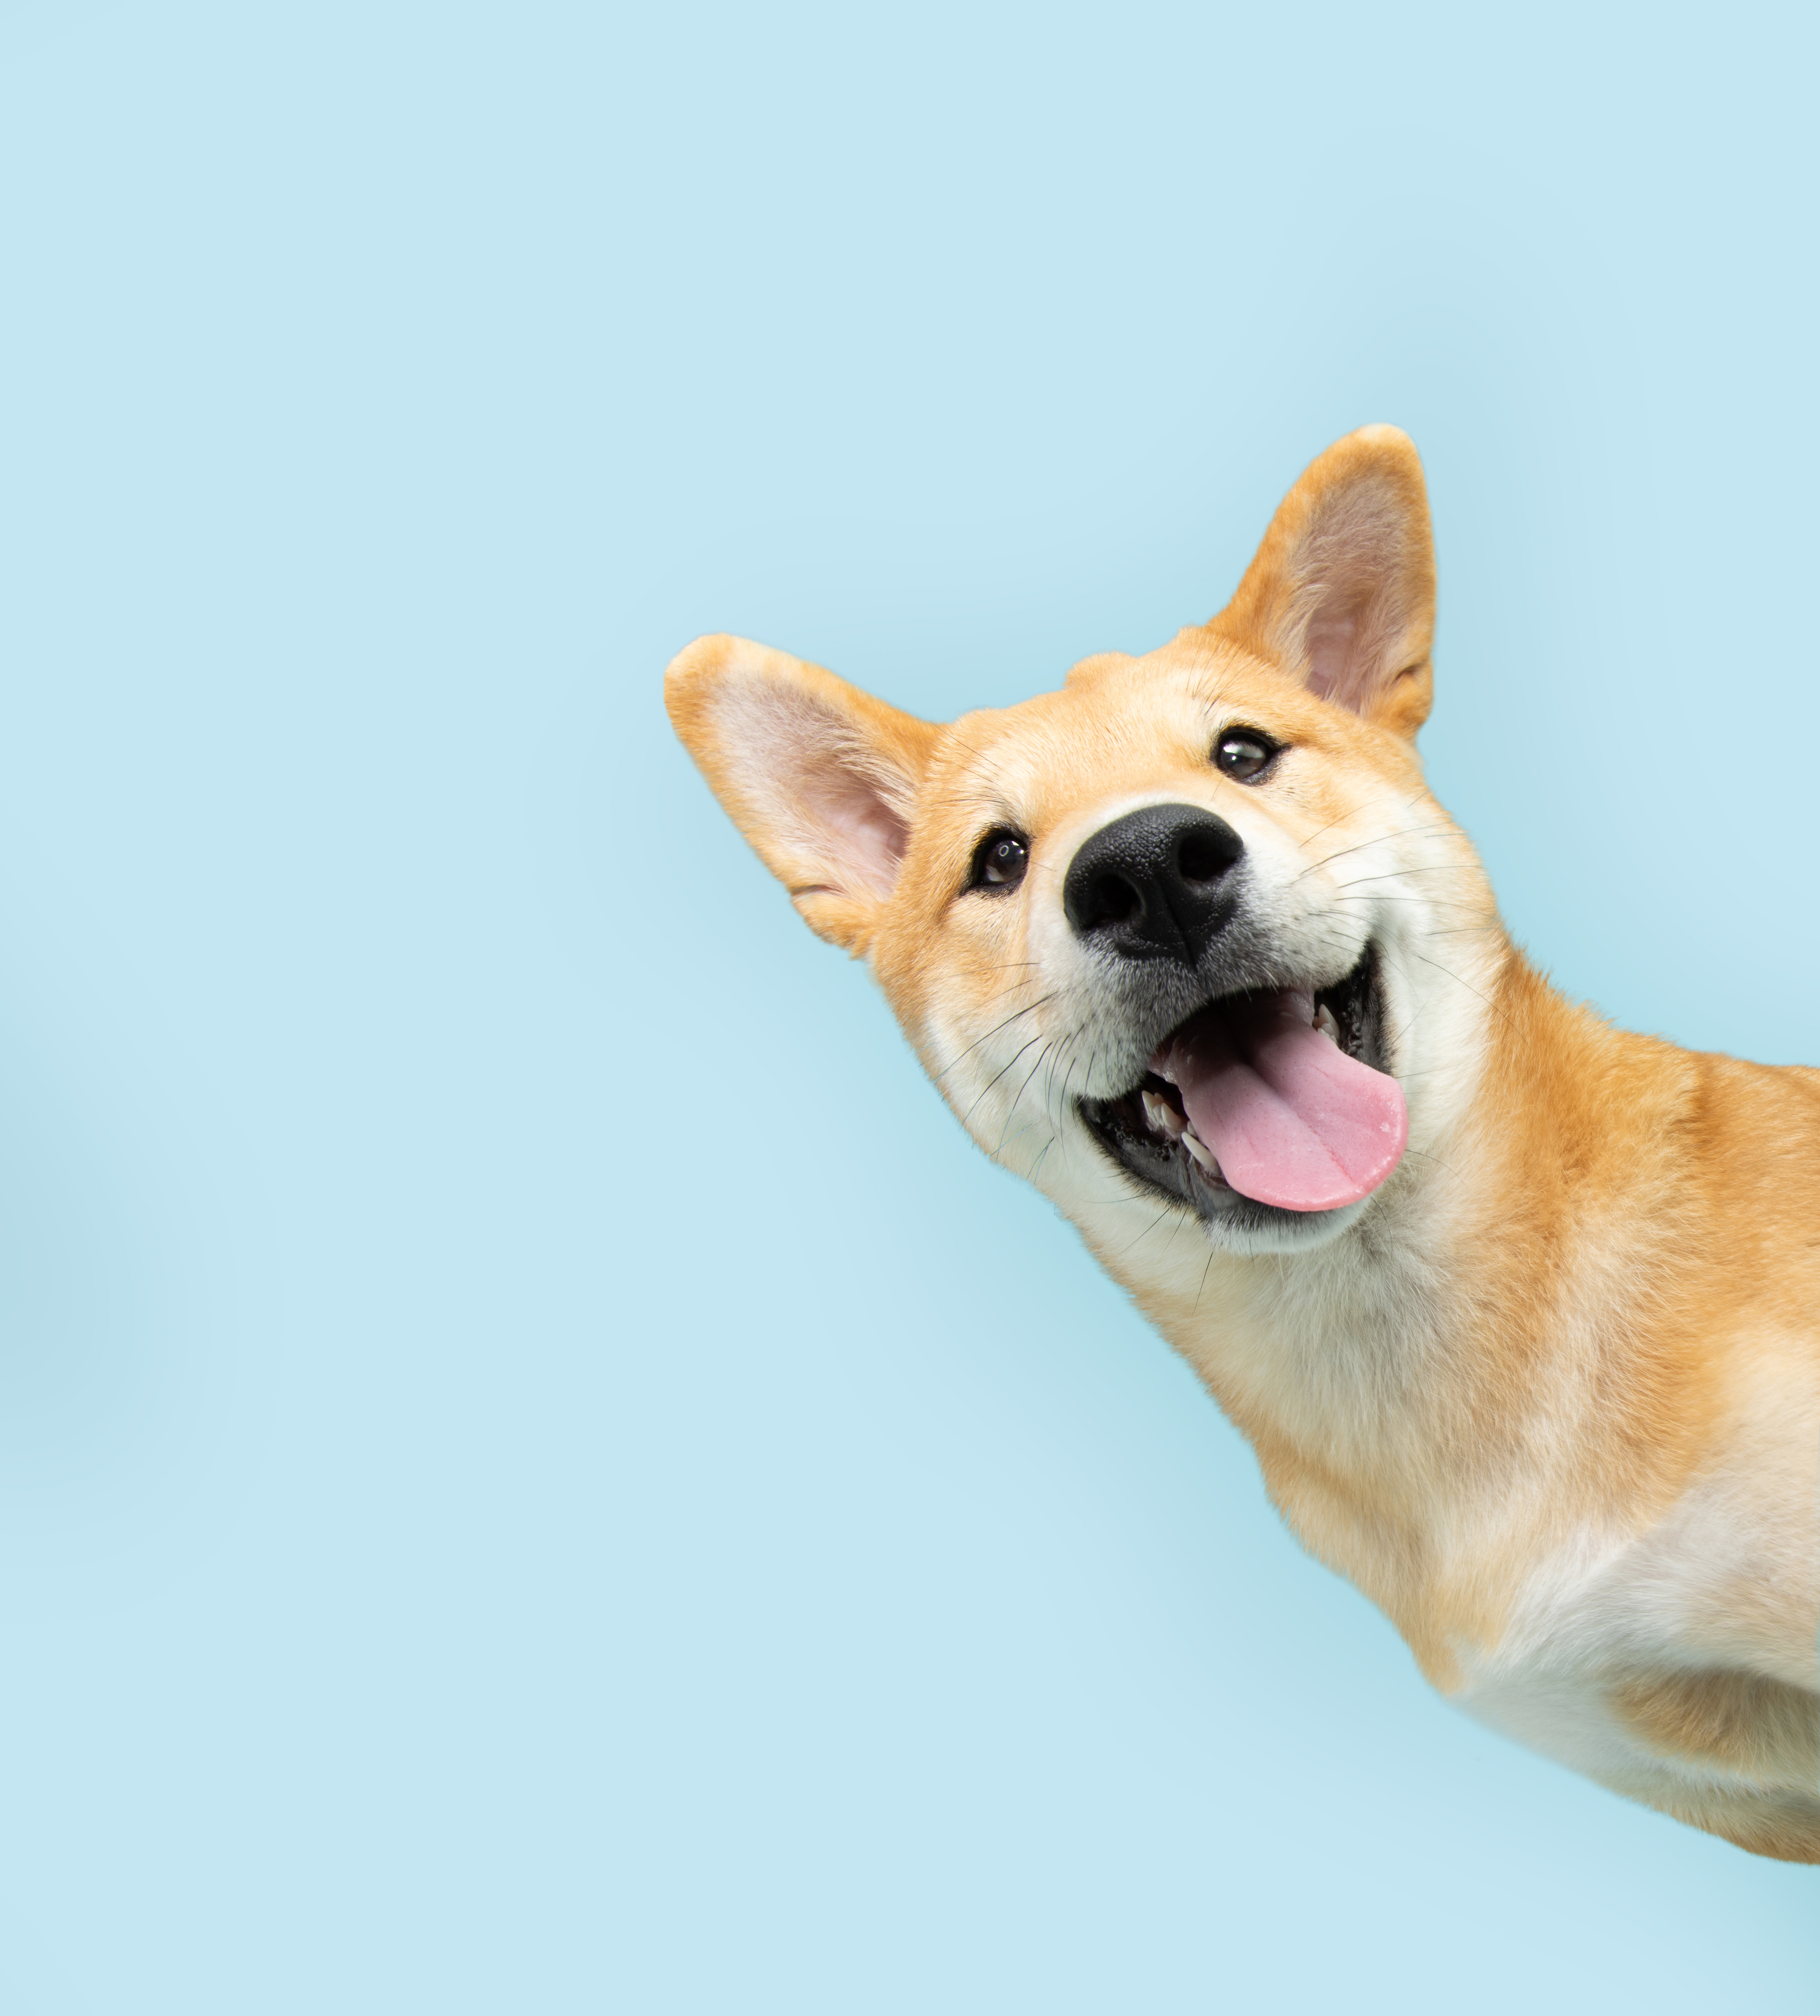 A smiley dog on a pale blue background